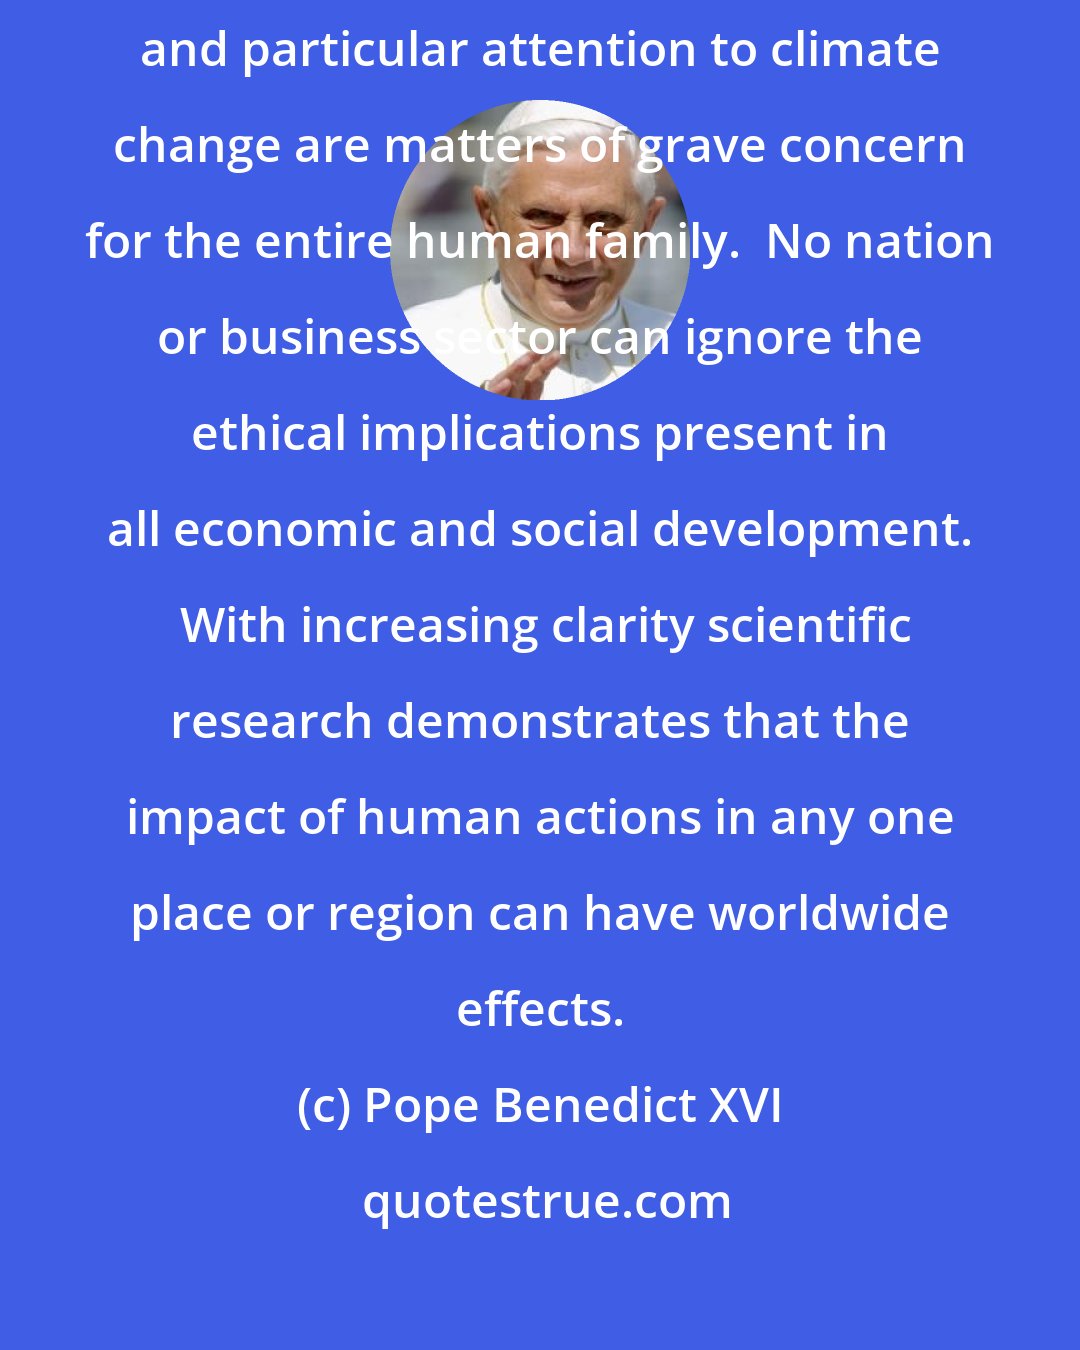 Pope Benedict XVI: Preservation of the environment, promotion of sustainable development and particular attention to climate change are matters of grave concern for the entire human family.  No nation or business sector can ignore the ethical implications present in all economic and social development.  With increasing clarity scientific research demonstrates that the impact of human actions in any one place or region can have worldwide effects.